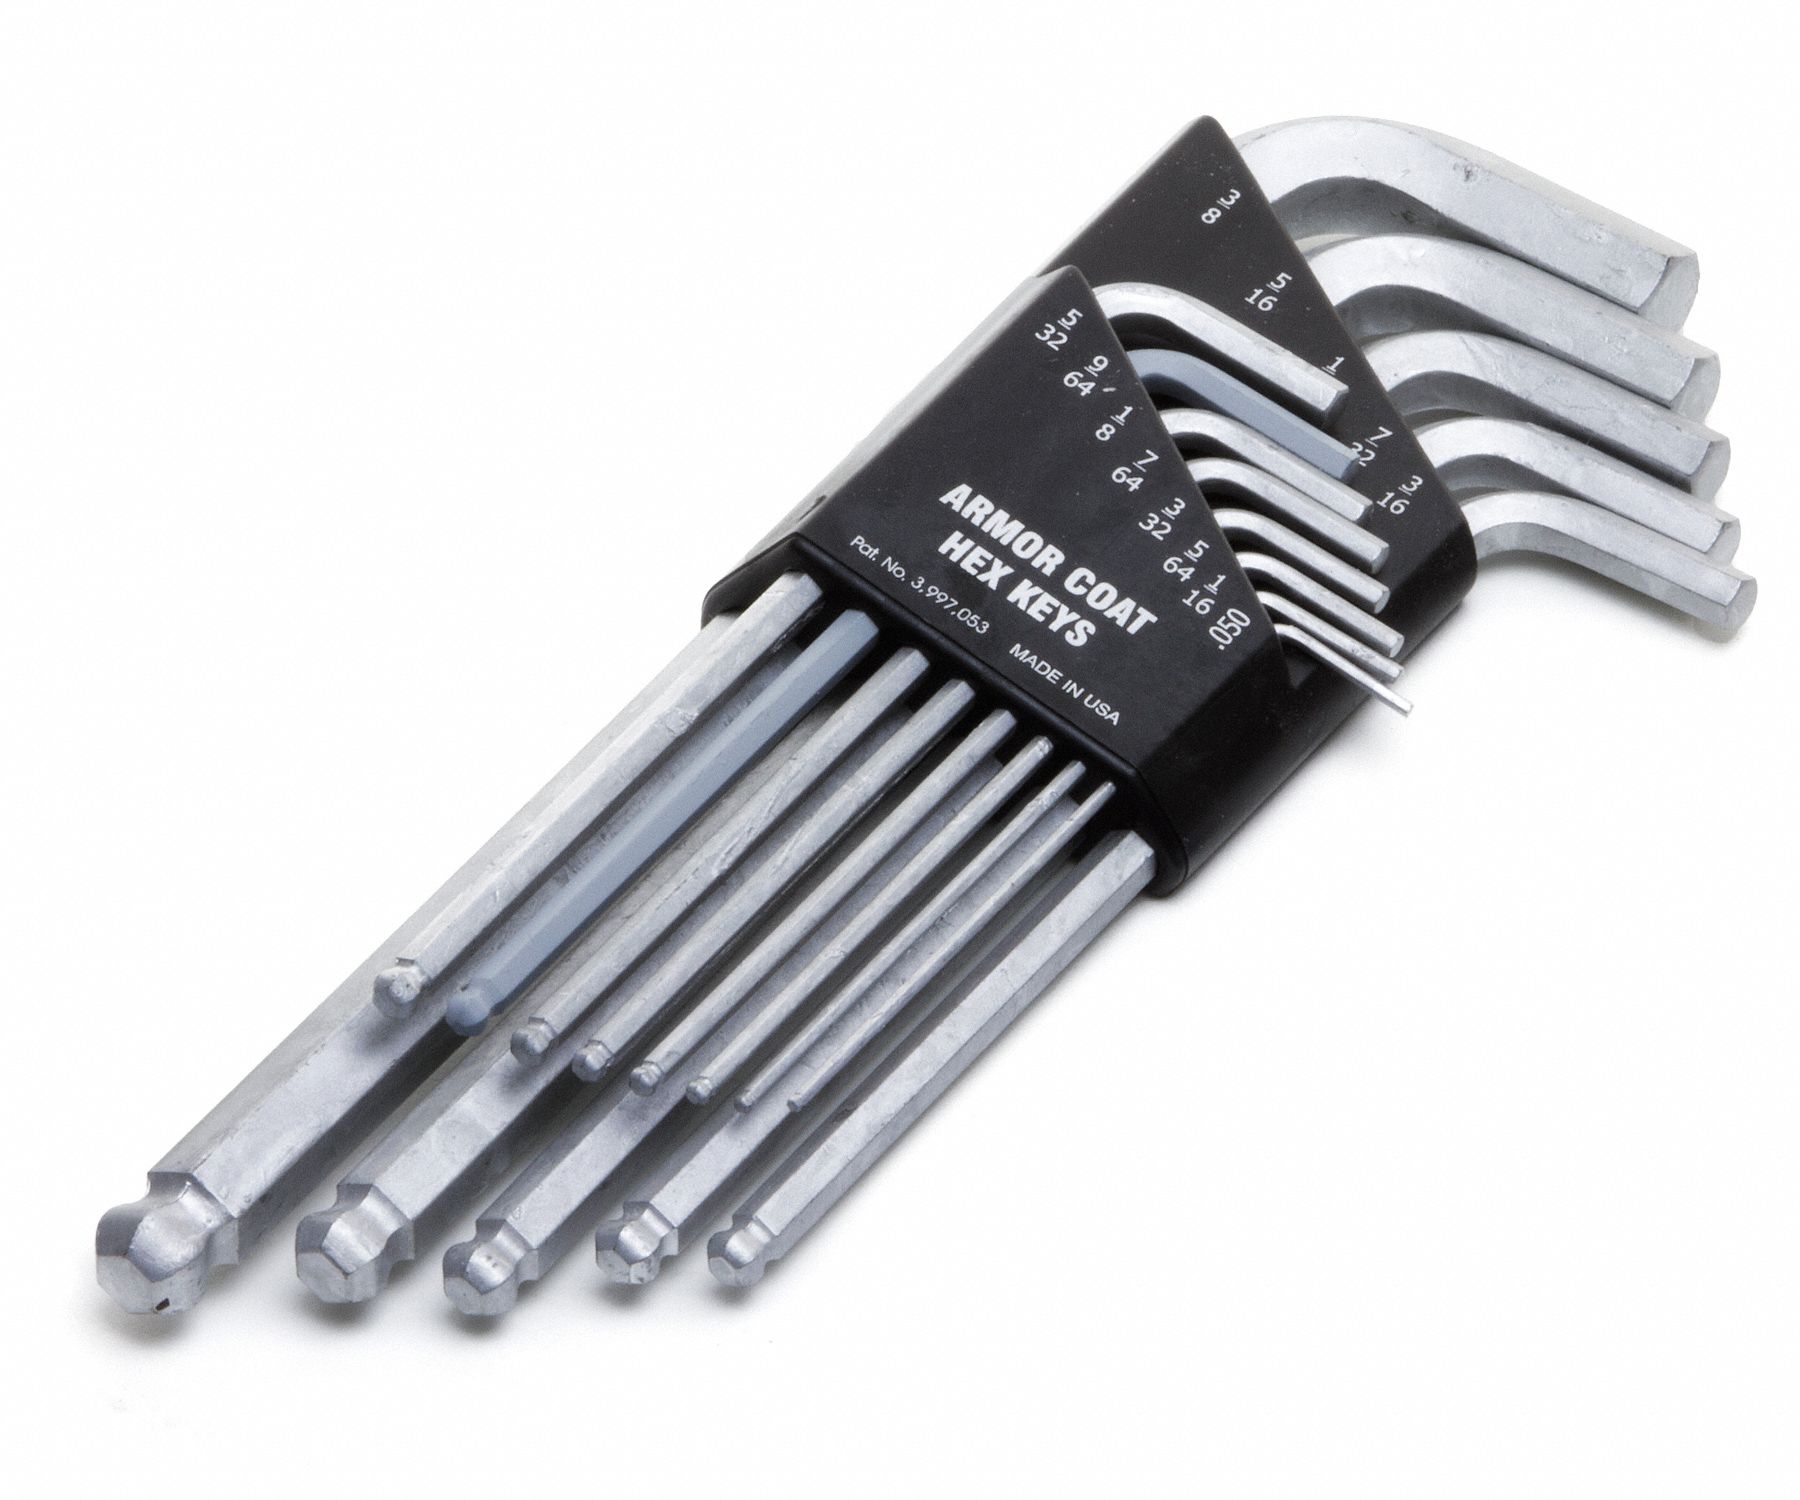 Alloy Steel Ball End L-Shaped SAE Hex Key Set, 2.81 to 6.81